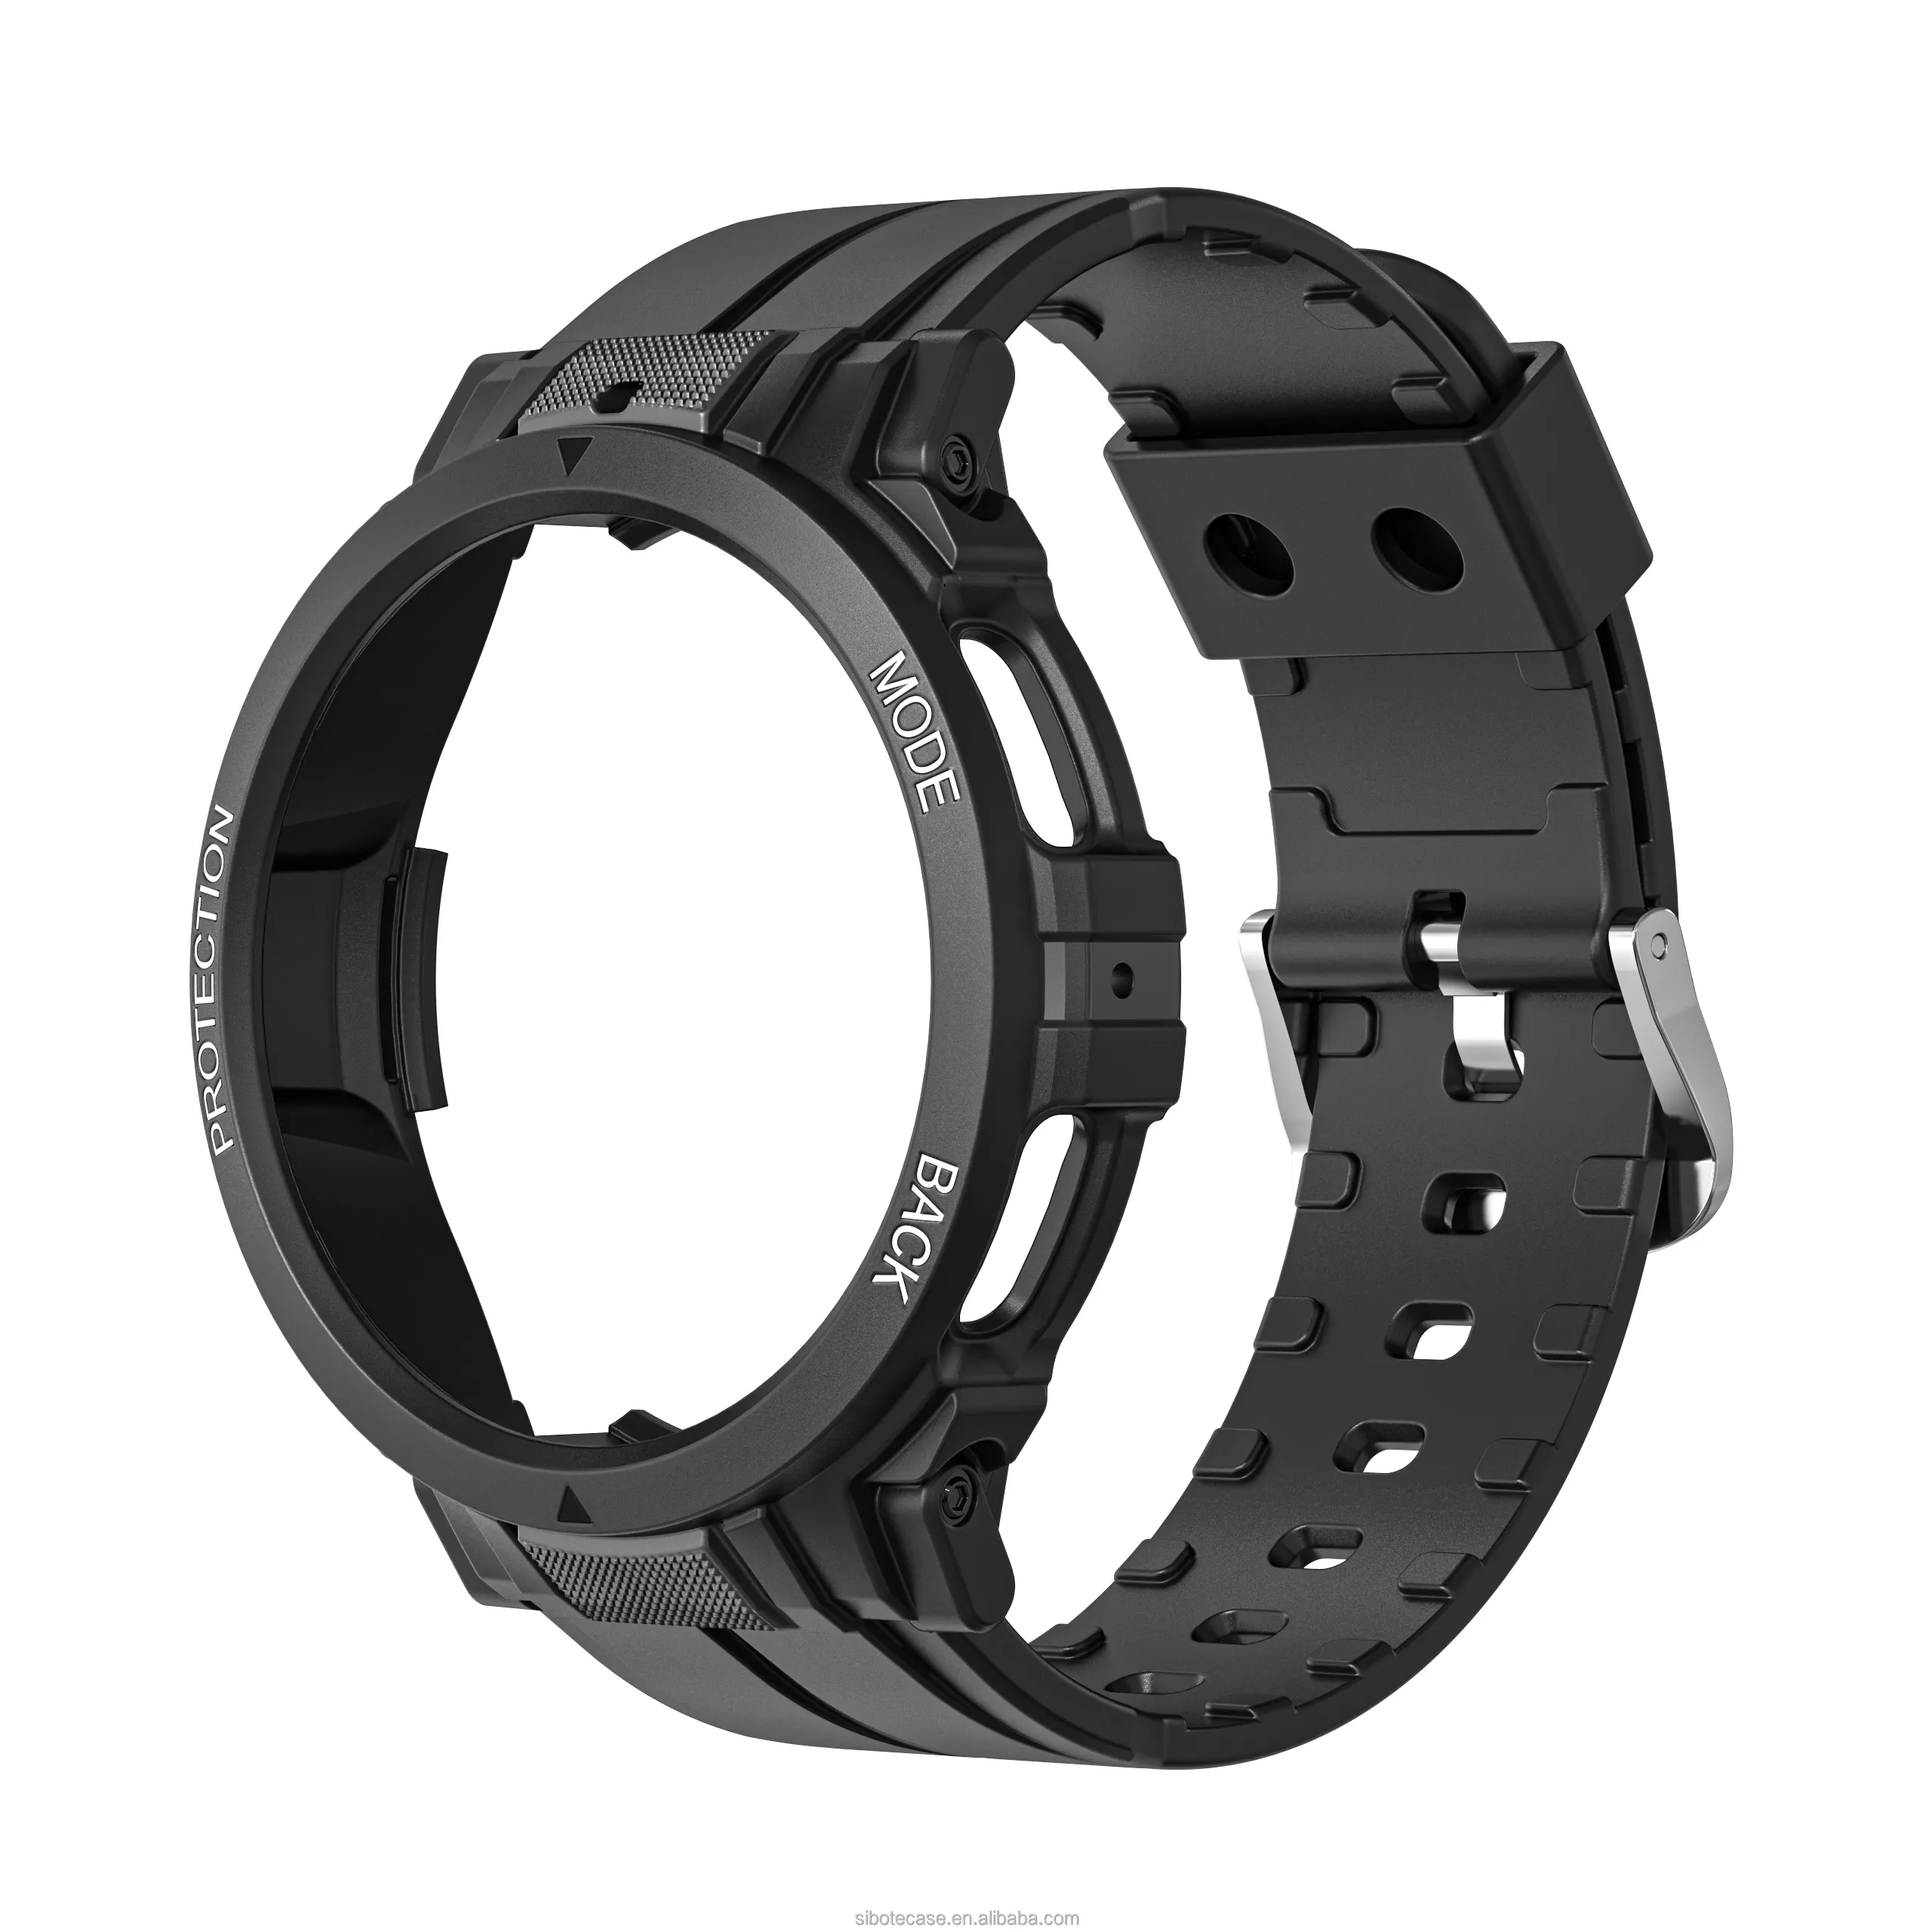 Armor Shockproof 45mm Watch Case Band Watch Cover Band For Samsung Watch 5 5 Pro